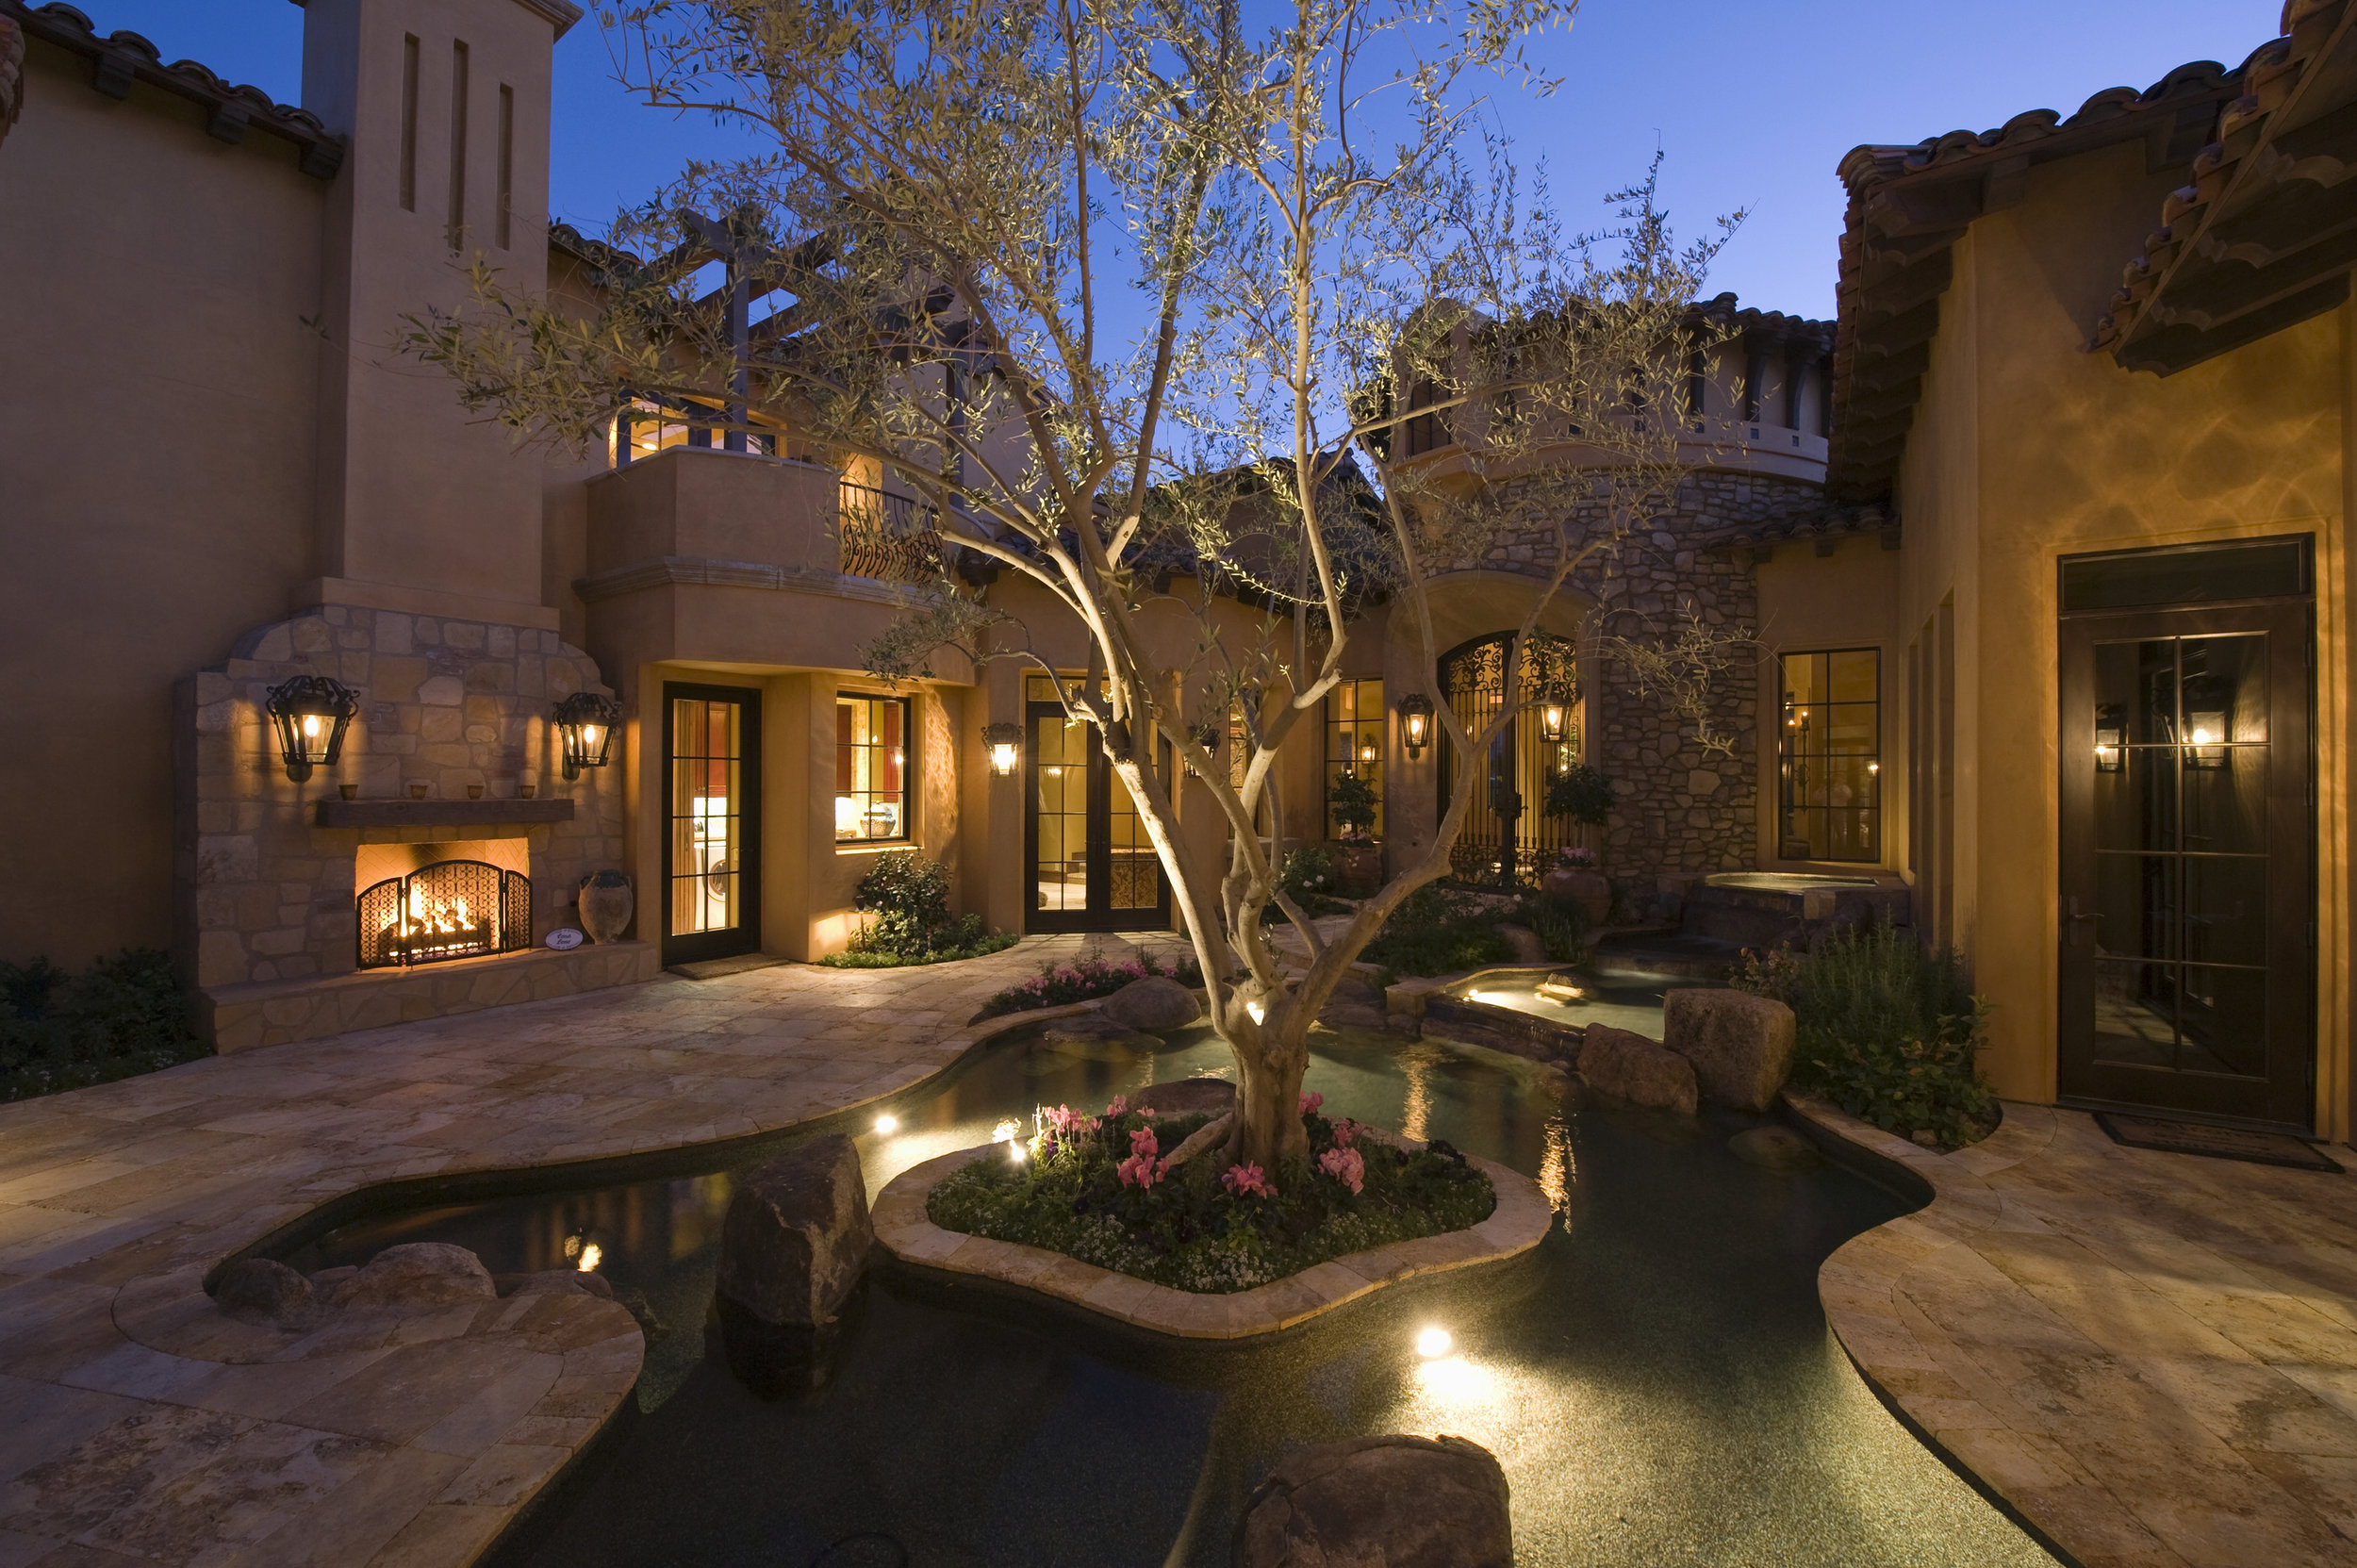 bigstock-Paved-courtyard-with-pond-in-l-49297967.jpg